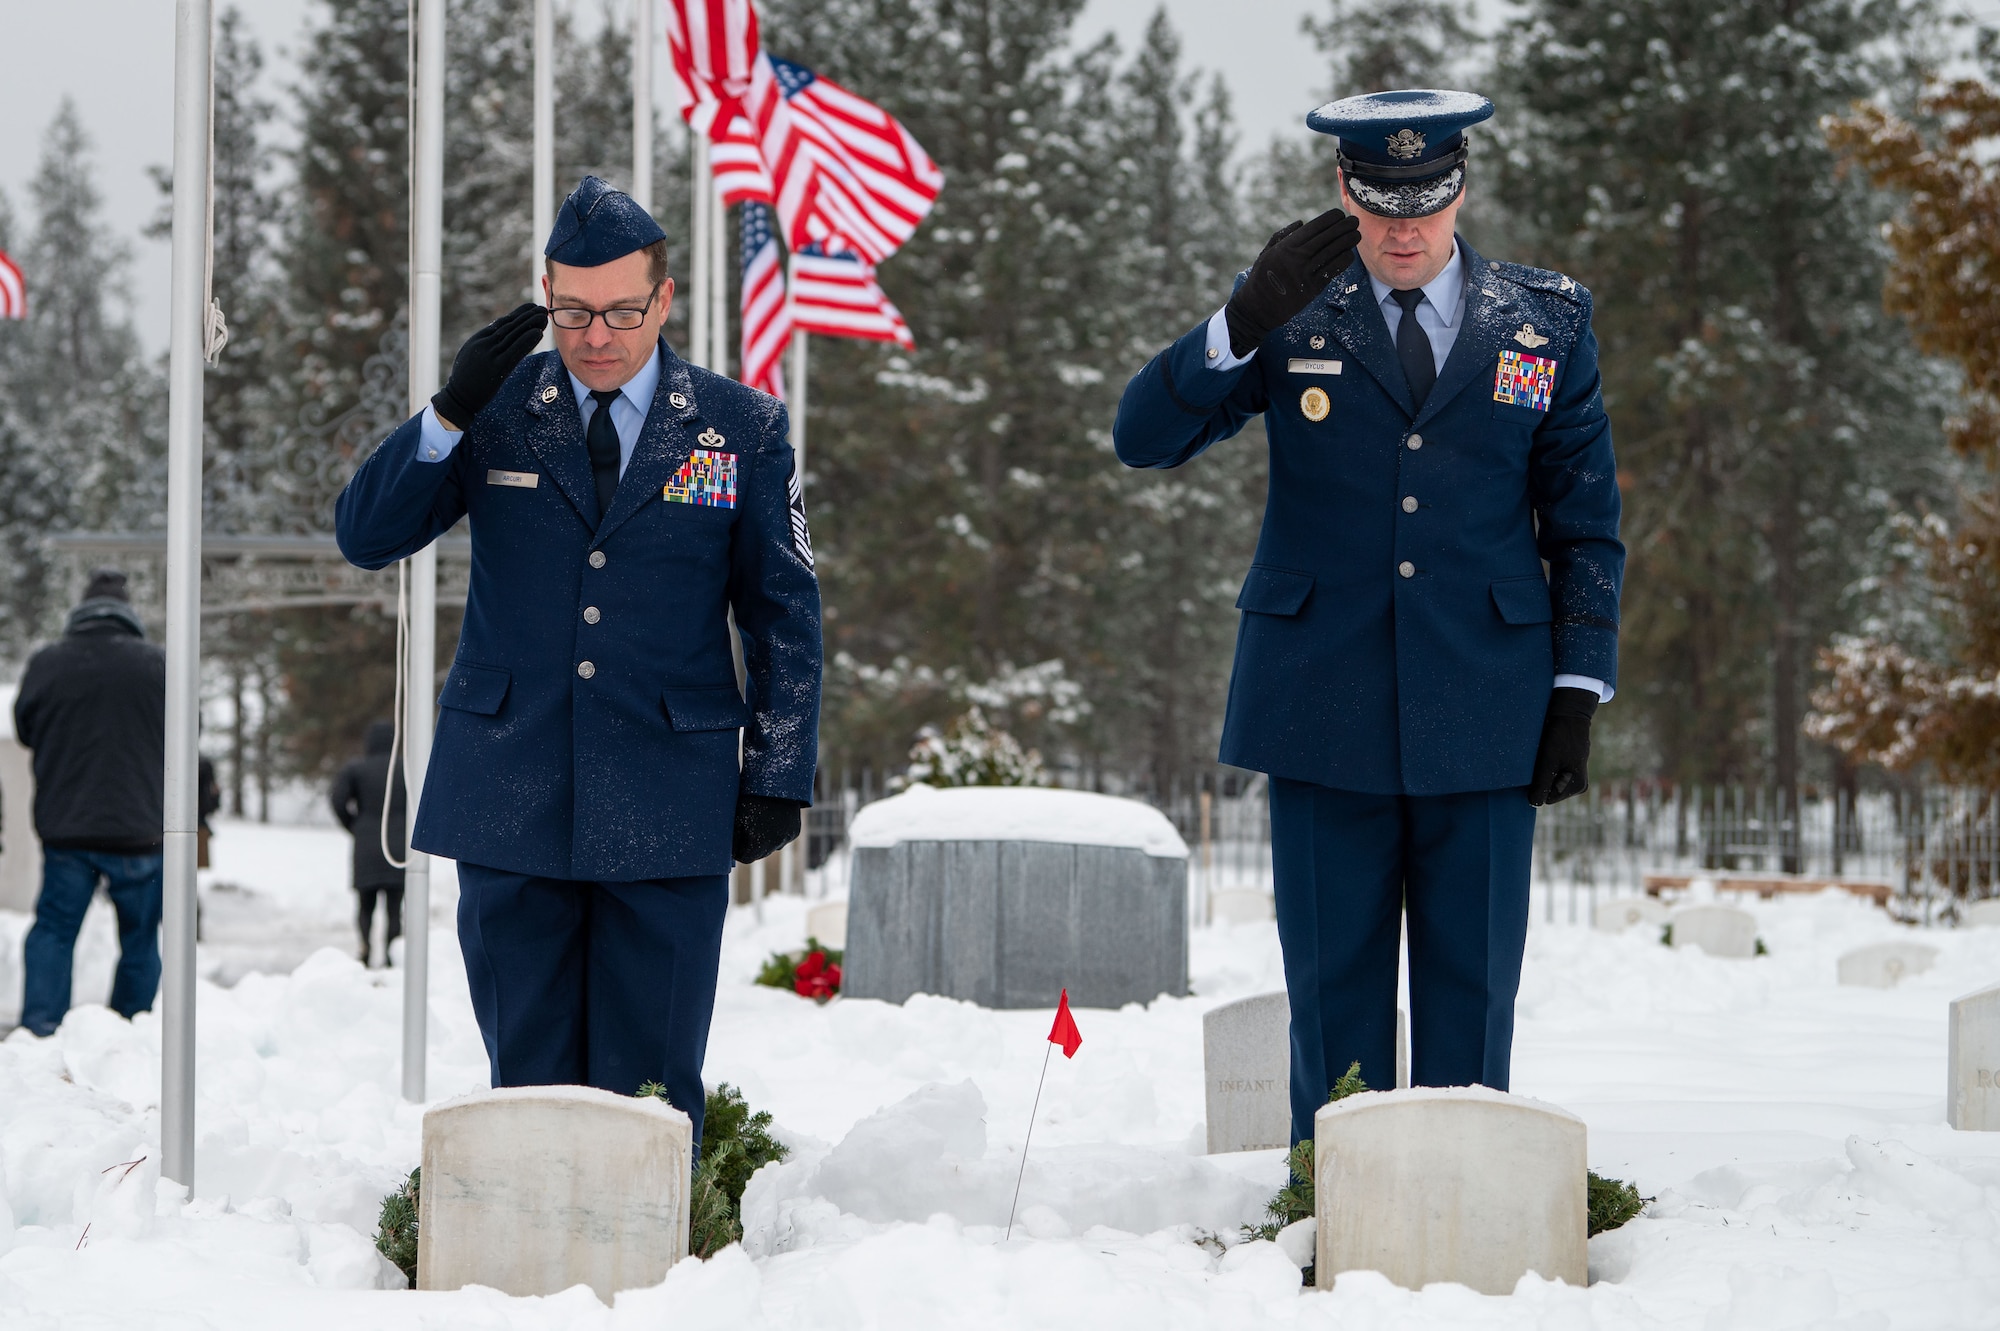 U.S. Air Force Chief Master Sgt. William Arcuri (left) and Col. Chesley Dycus (right), 92nd Air Refueling Wing command chief and commander, render a salute during a Wreaths Across America ceremony at Fort Wright Cemetery in Spokane, Washington, Dec. 17, 2022. The event has participating members place wreaths on fallen service members’ gravestones and displays ceremonial wreaths for each branch of service. (U.S. Air Force photo by Airman 1st Class Stassney Davis)